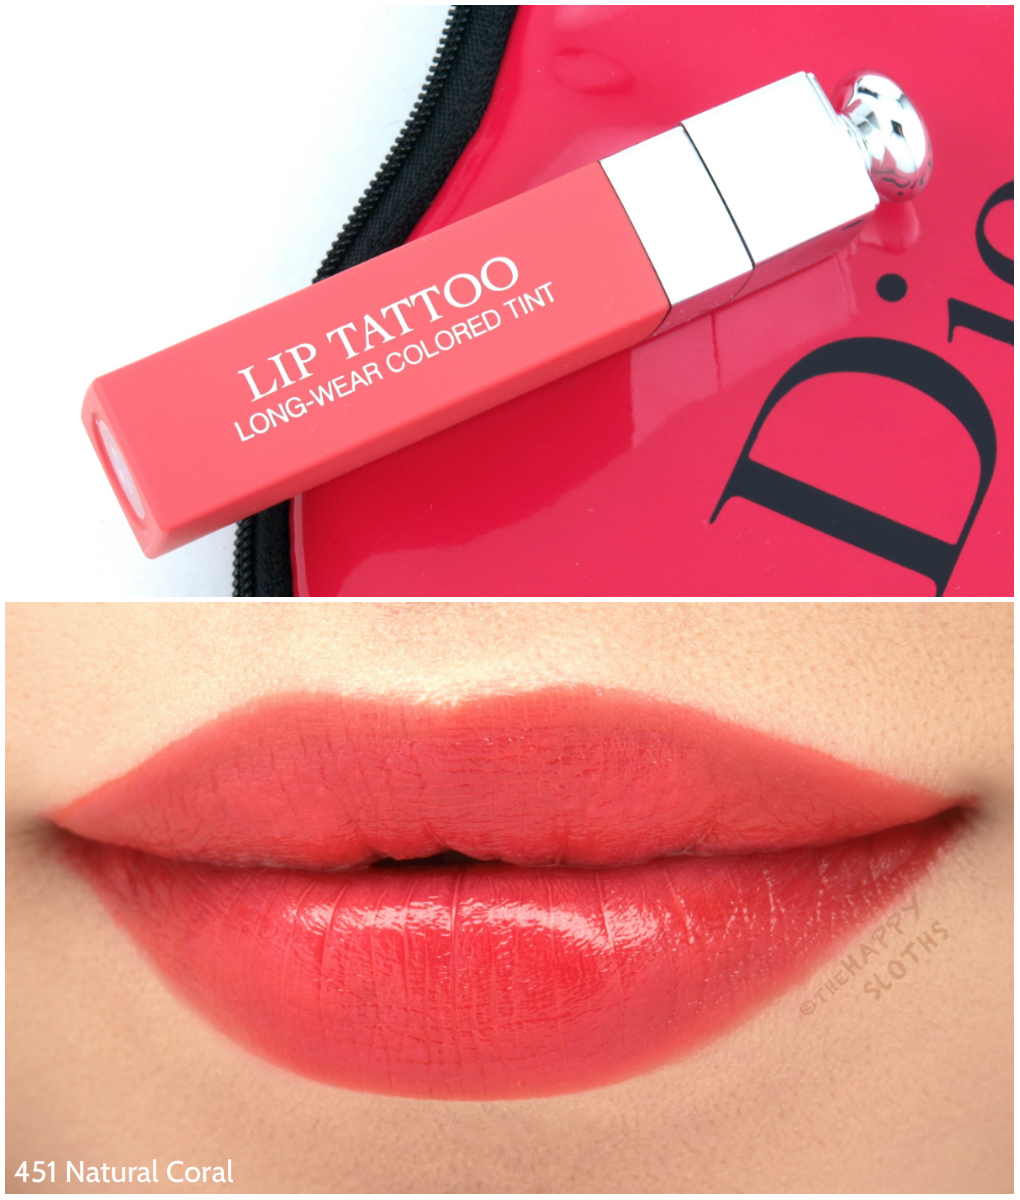 Dior Addict Lip Tattoo Long-Wear Colored Tint in "451 Natural Coral": Review and Swatches